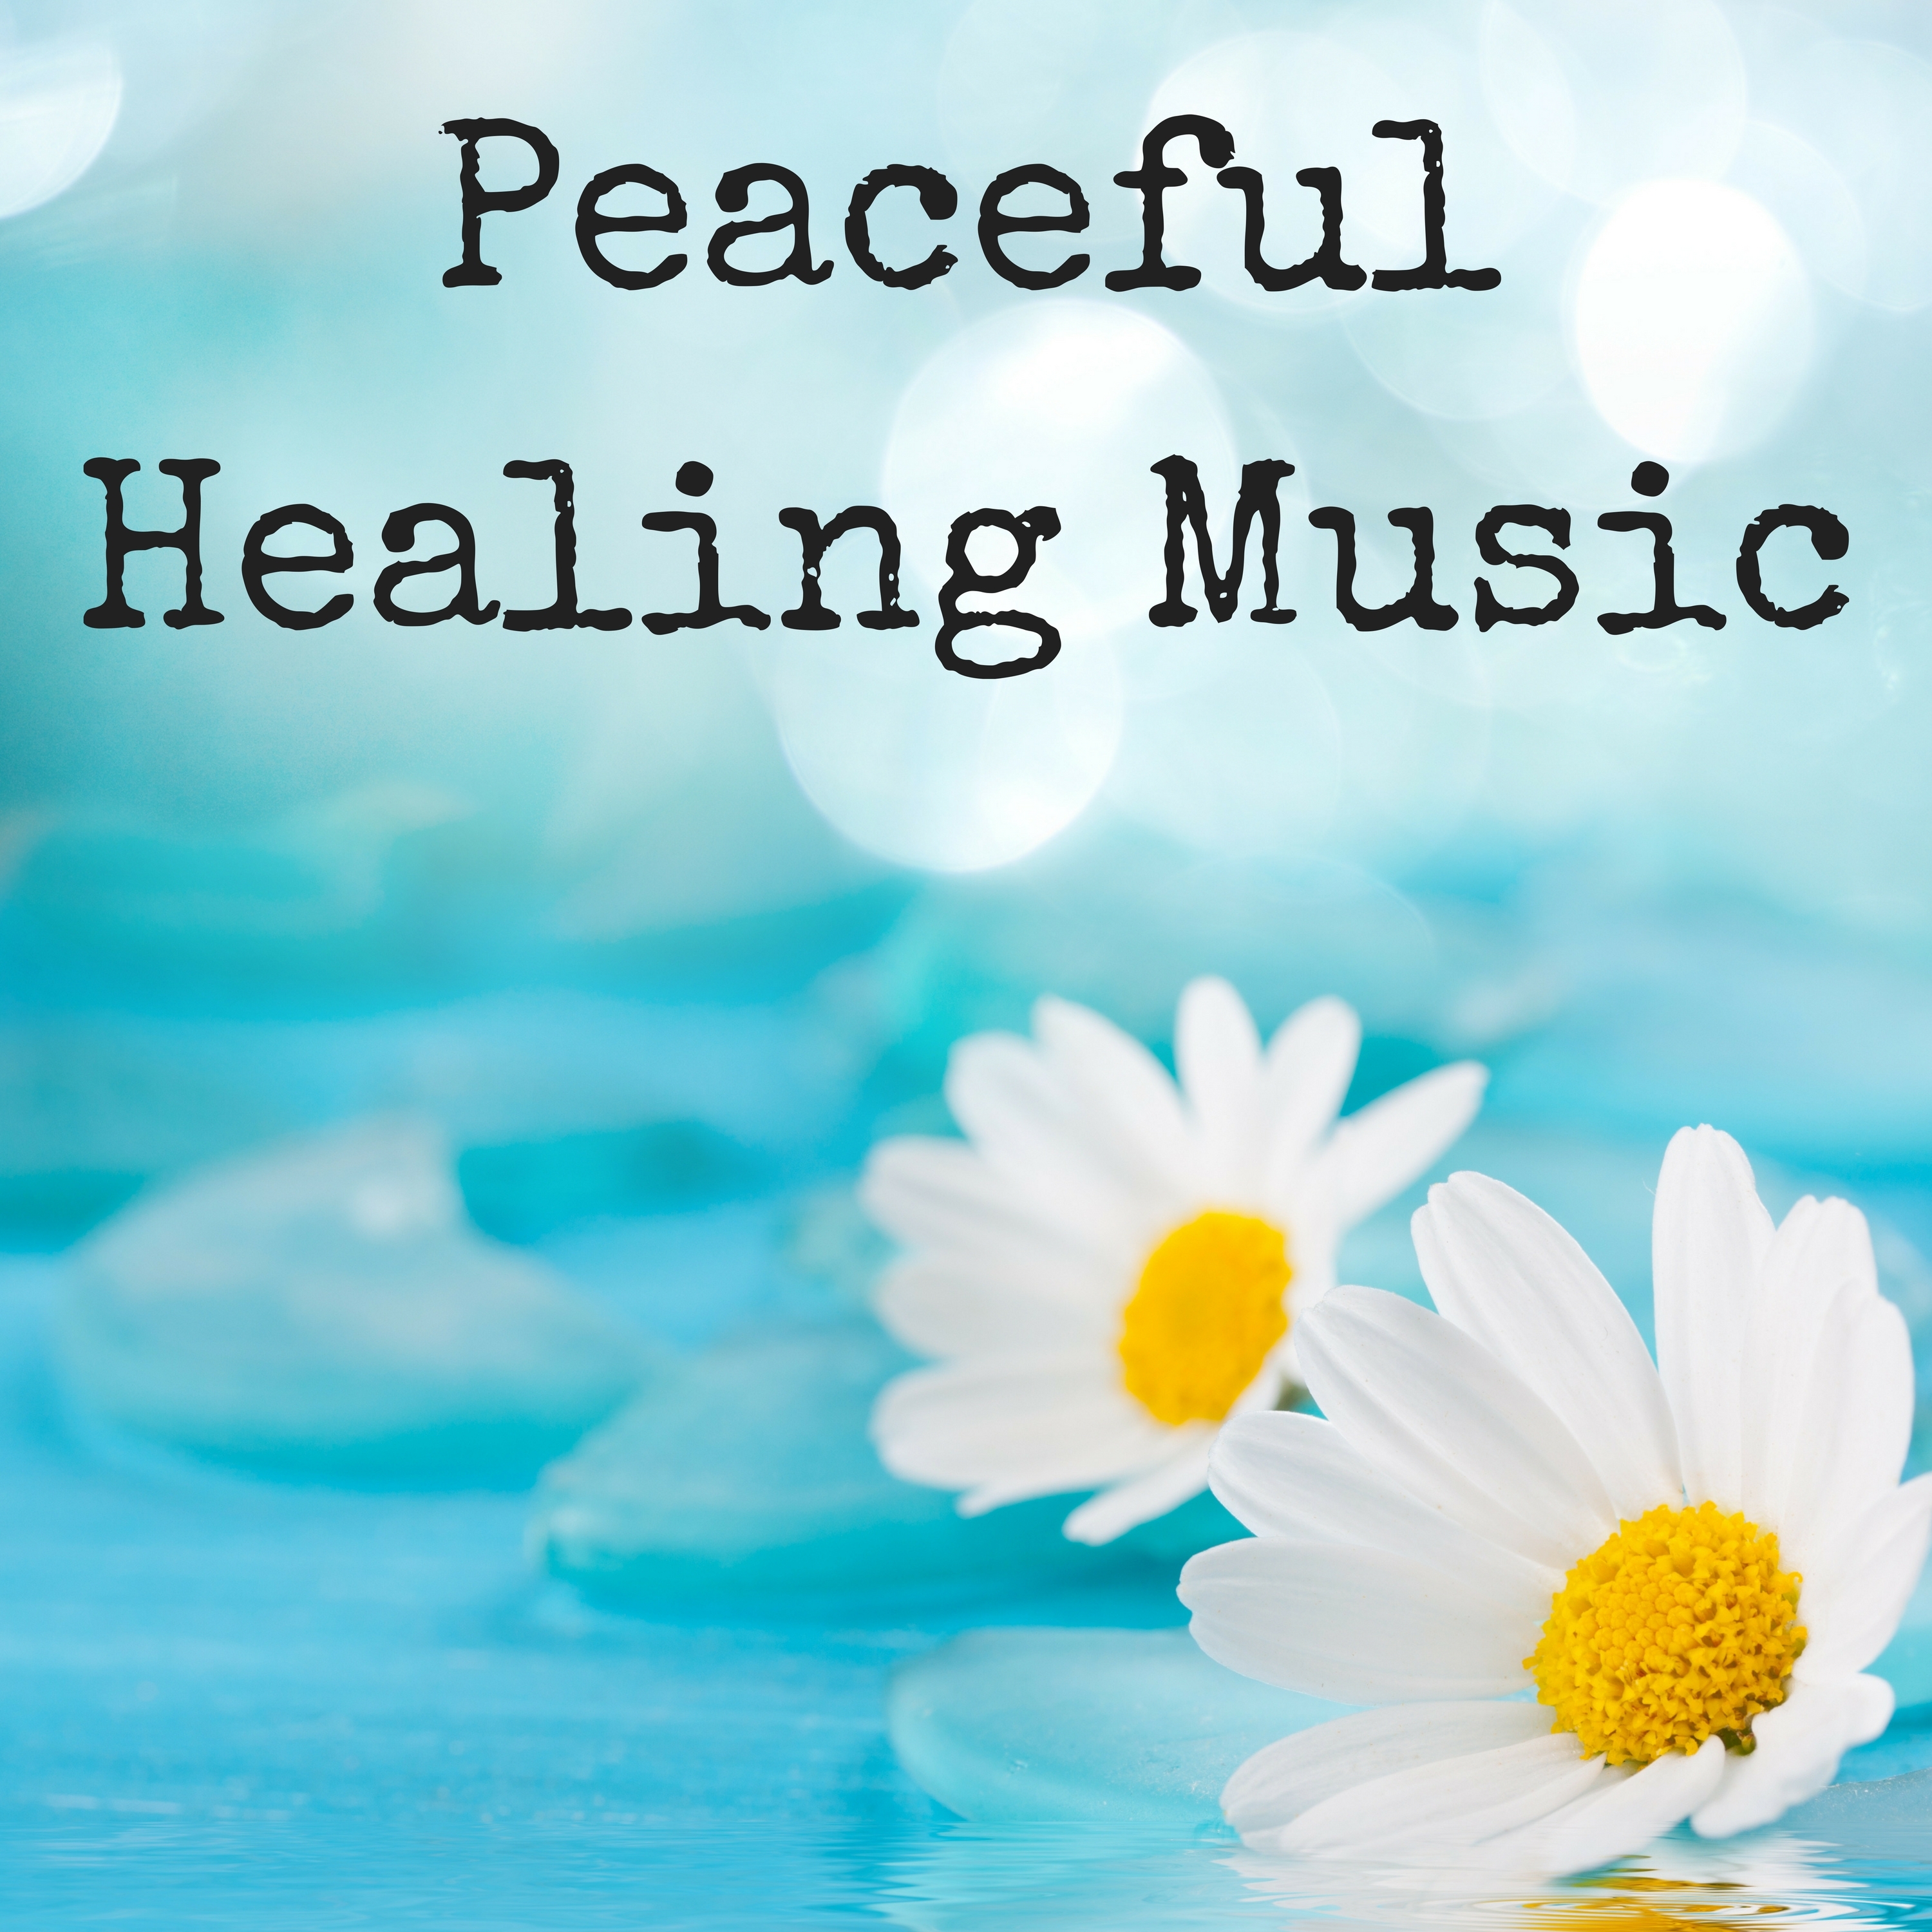 Peaceful Healing Music - Dreamland Pure Piano Songs for Beautiful Restful Nap